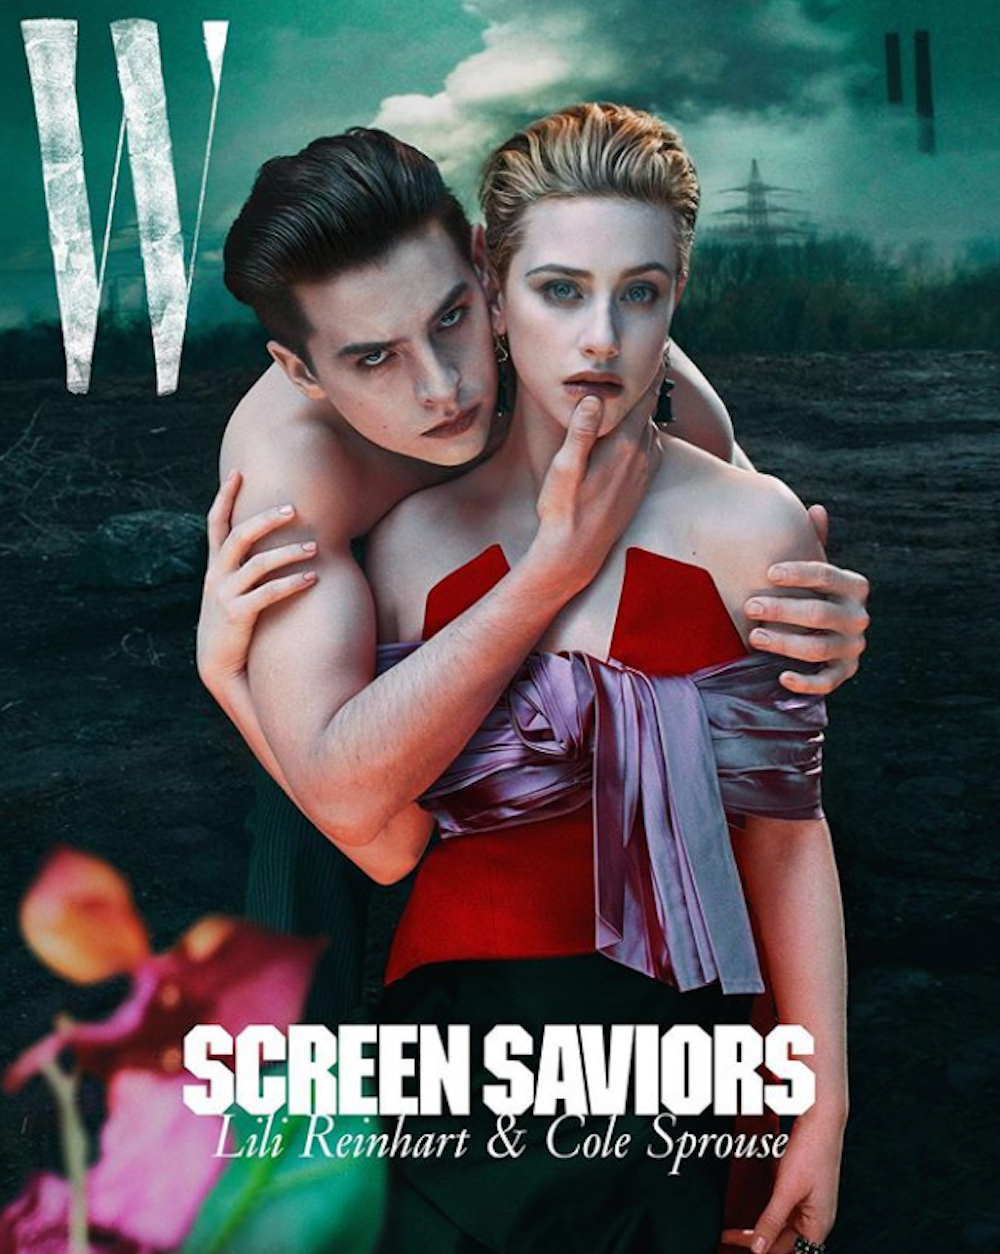 Lili Reinhart and Cole Sprouse Star in a Steamy W Magazine Cover